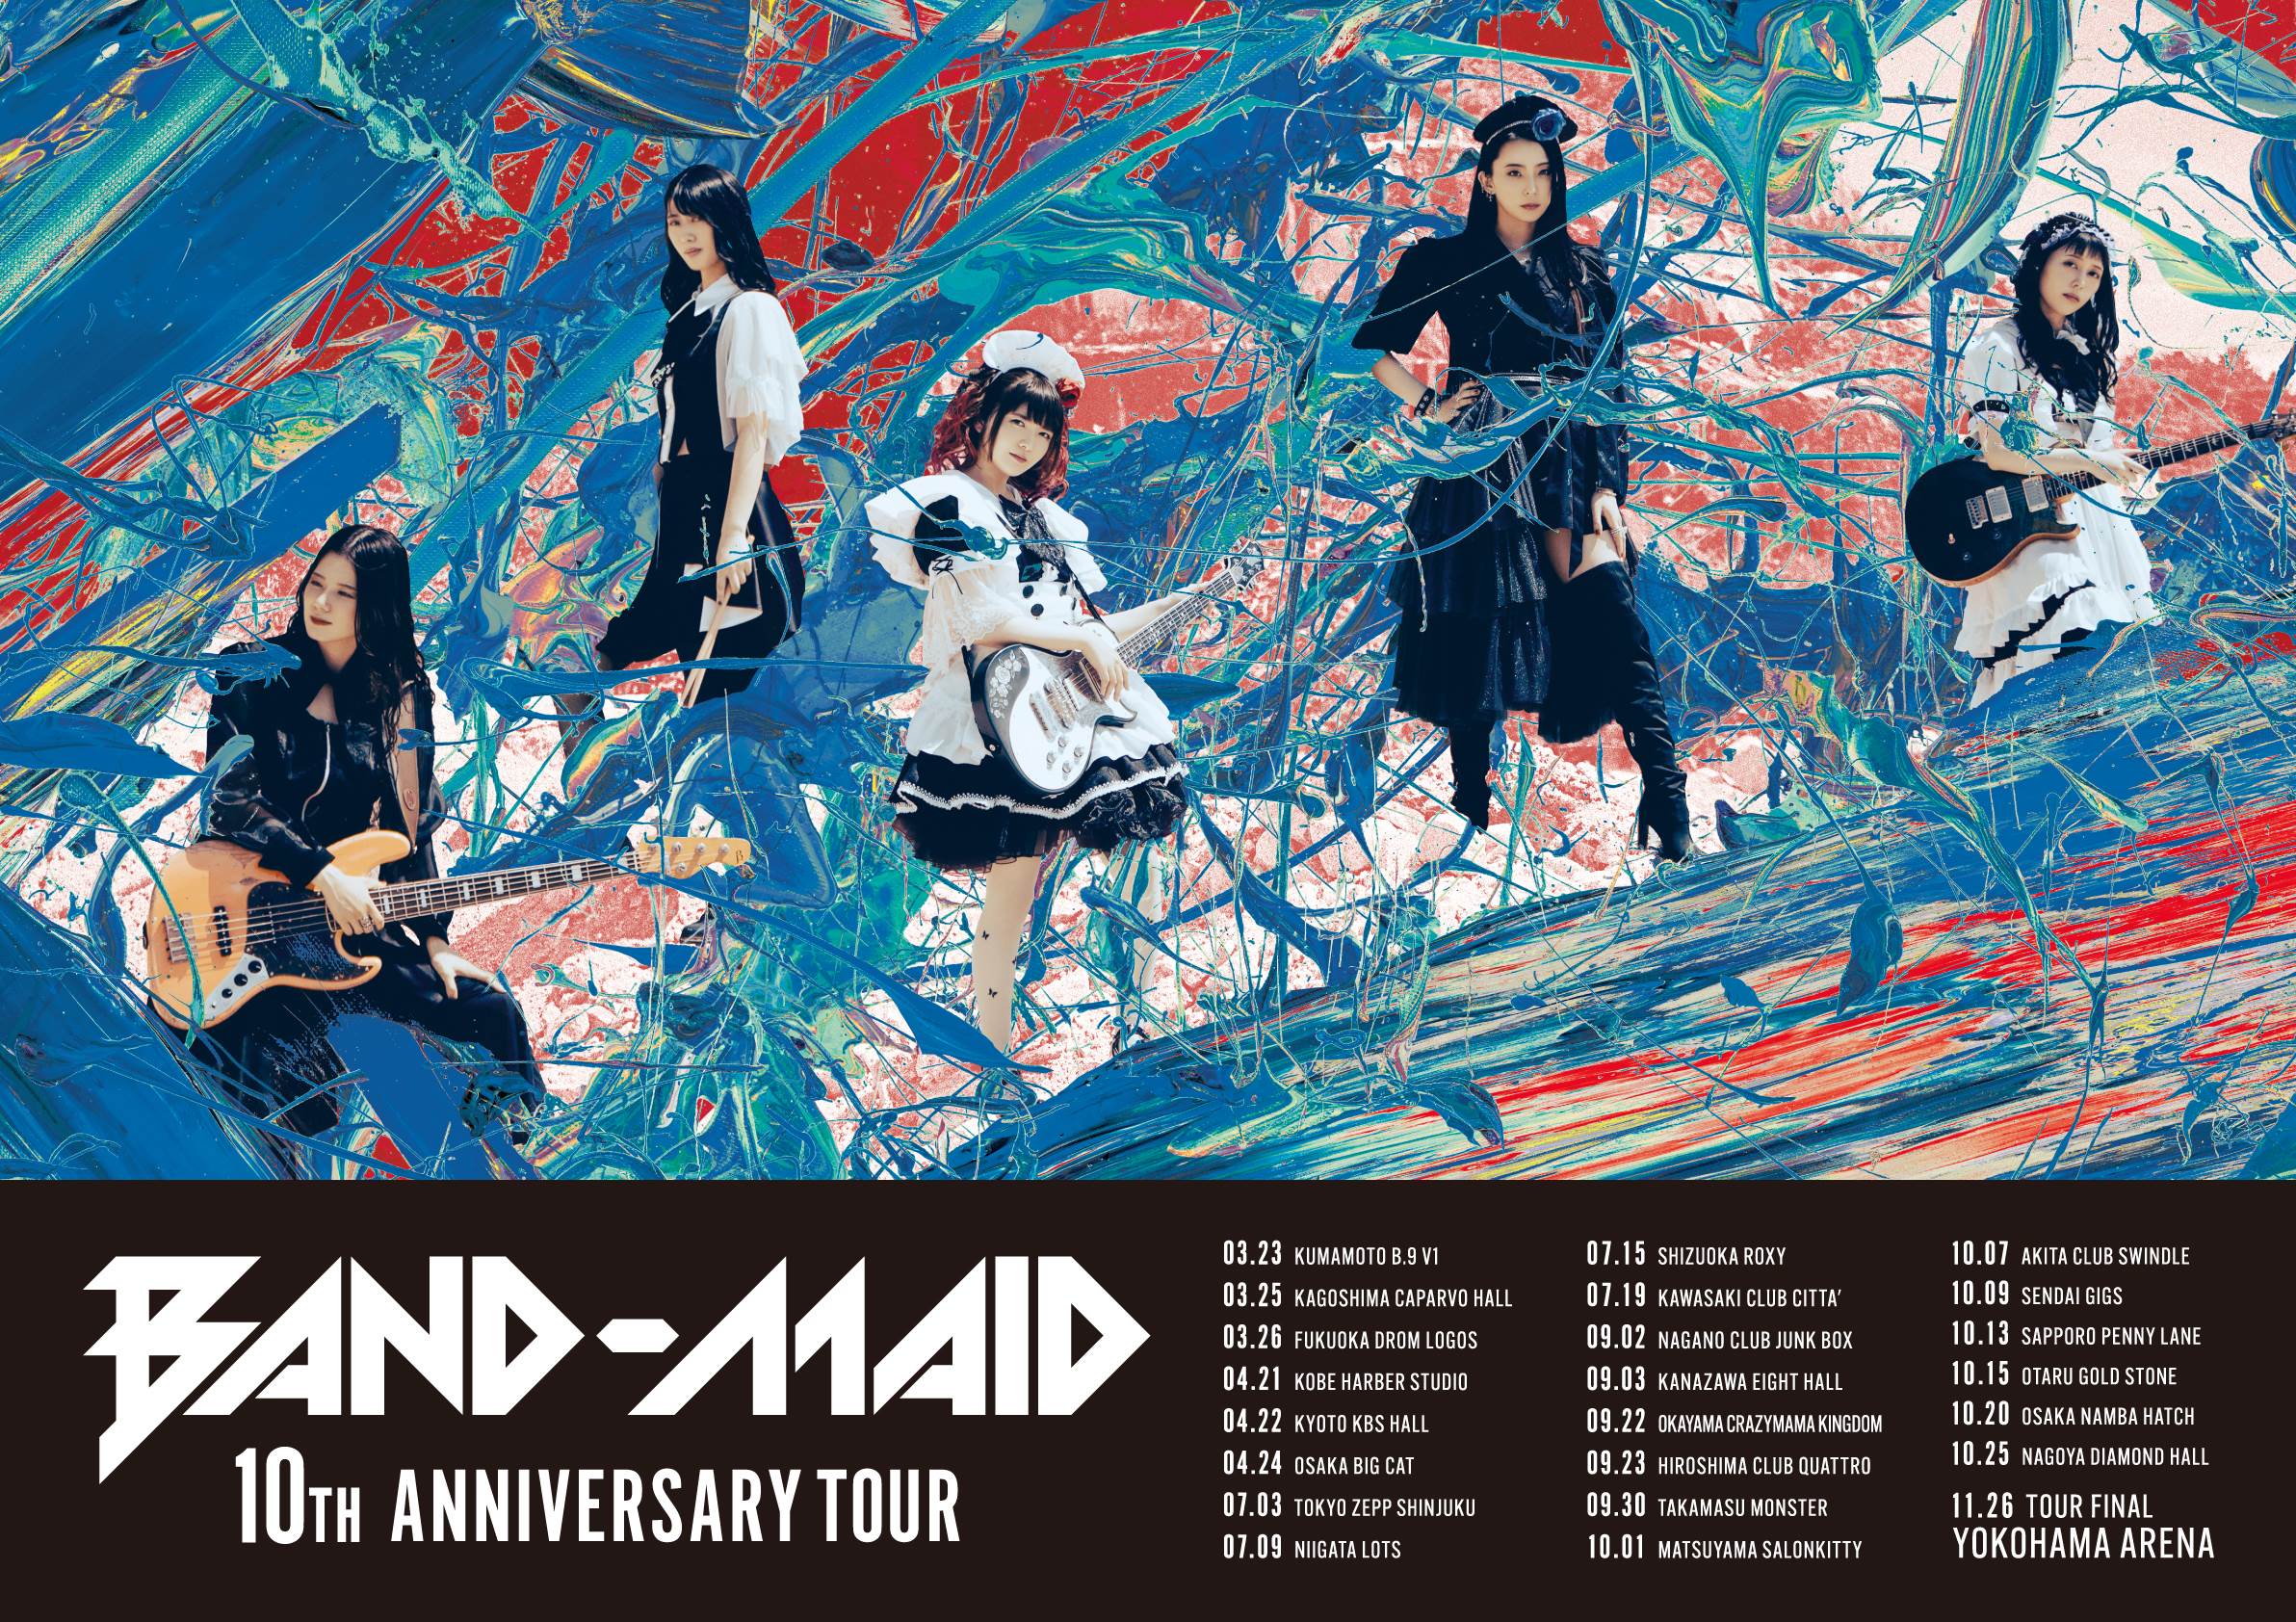 BAND-MAID Reveals 10th Anniversary Tour in Japan and America